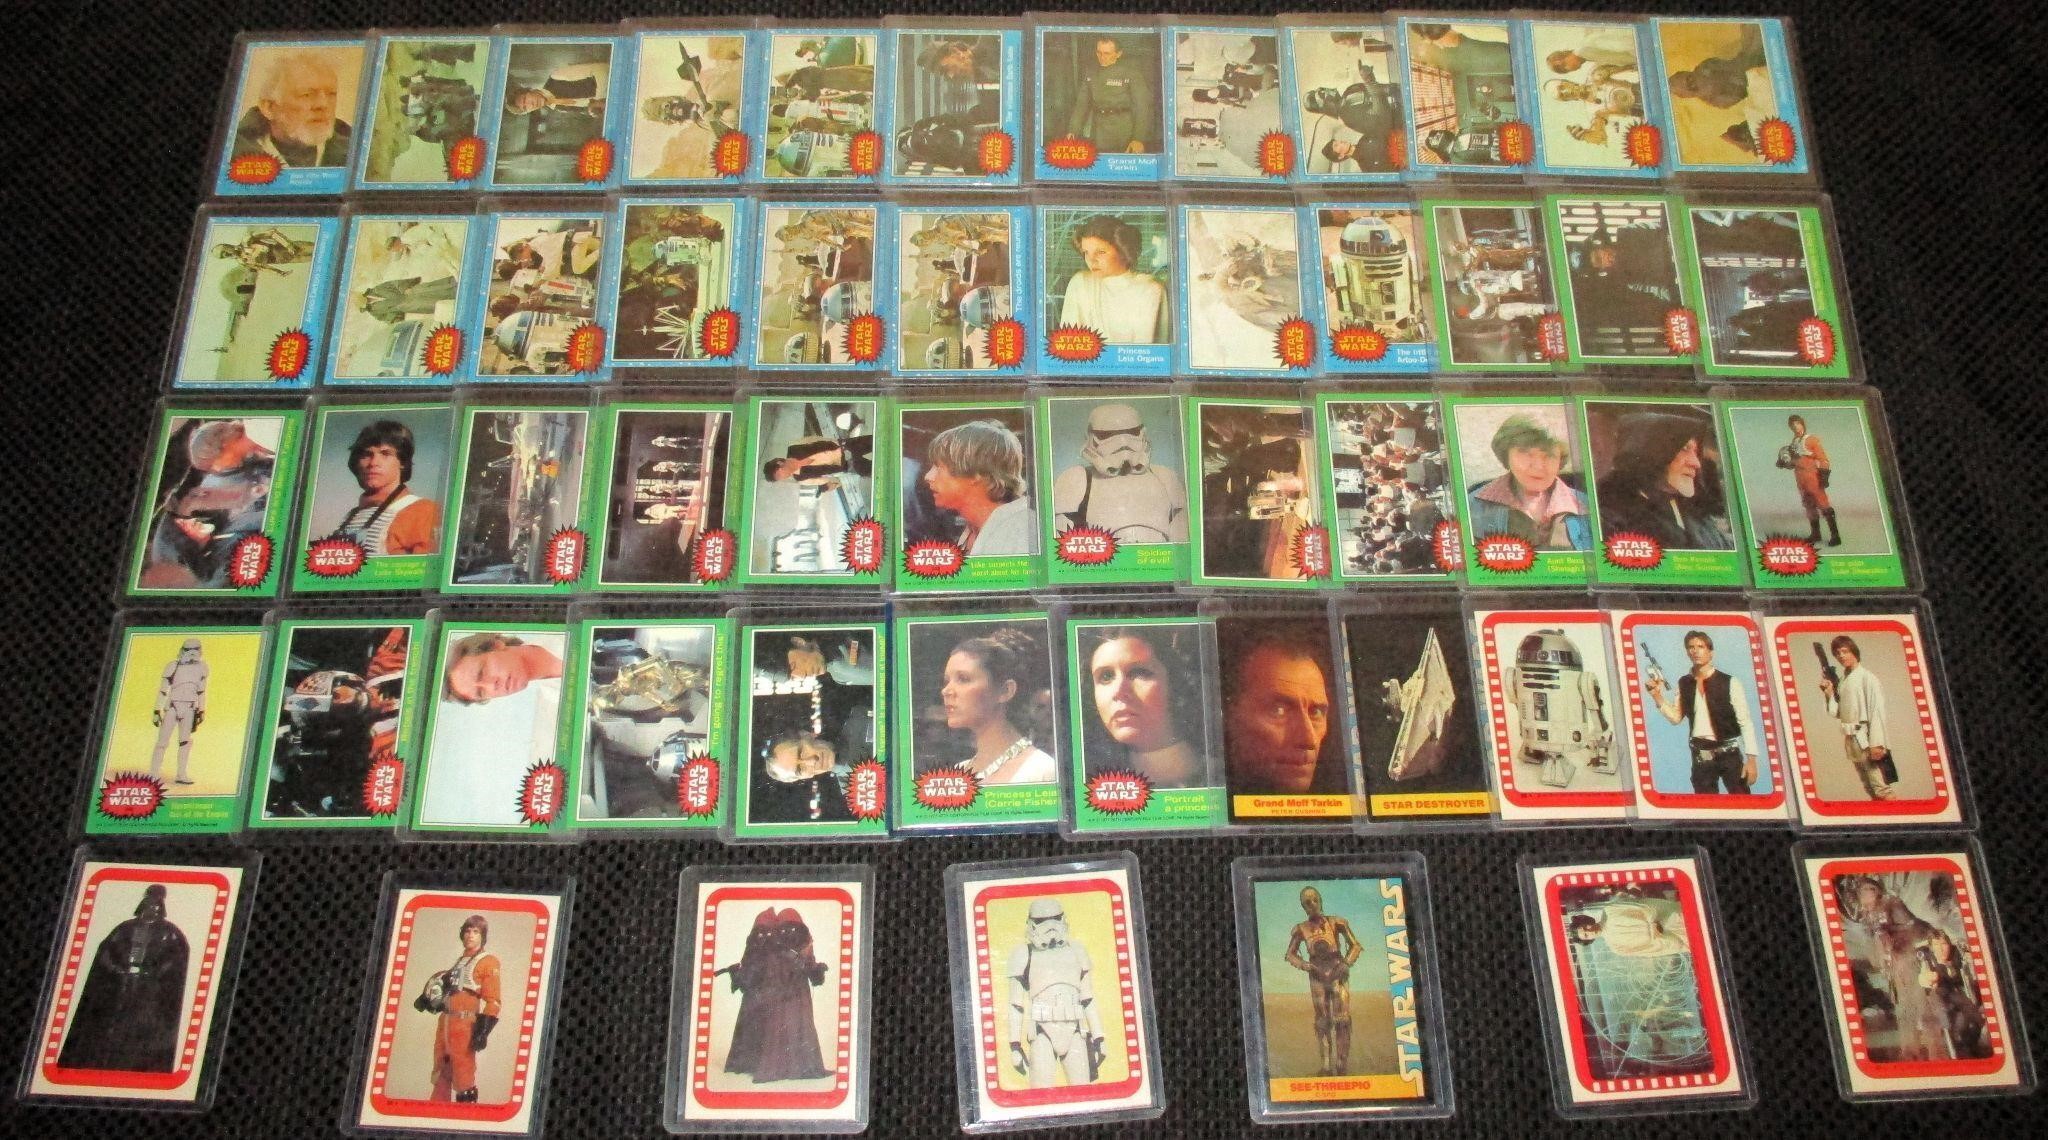 1977 TOPPS STAR WARS TRADING CARDS